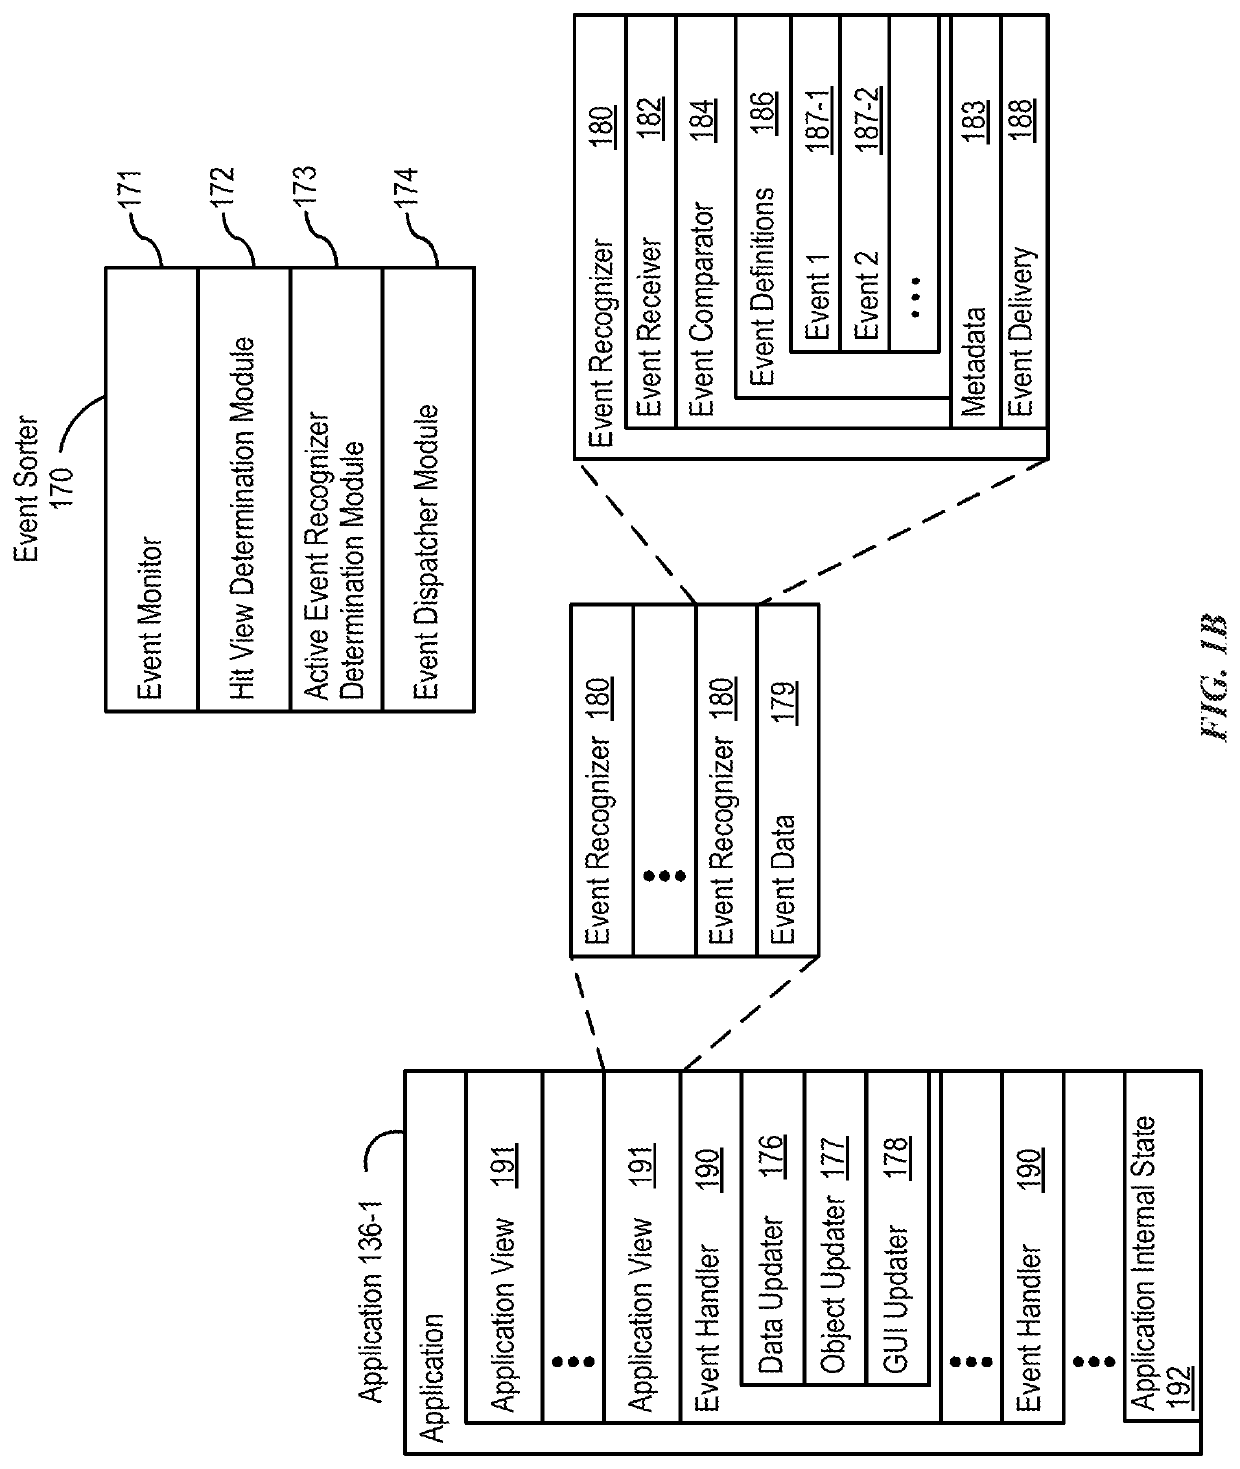 User interfaces for enabling an activity